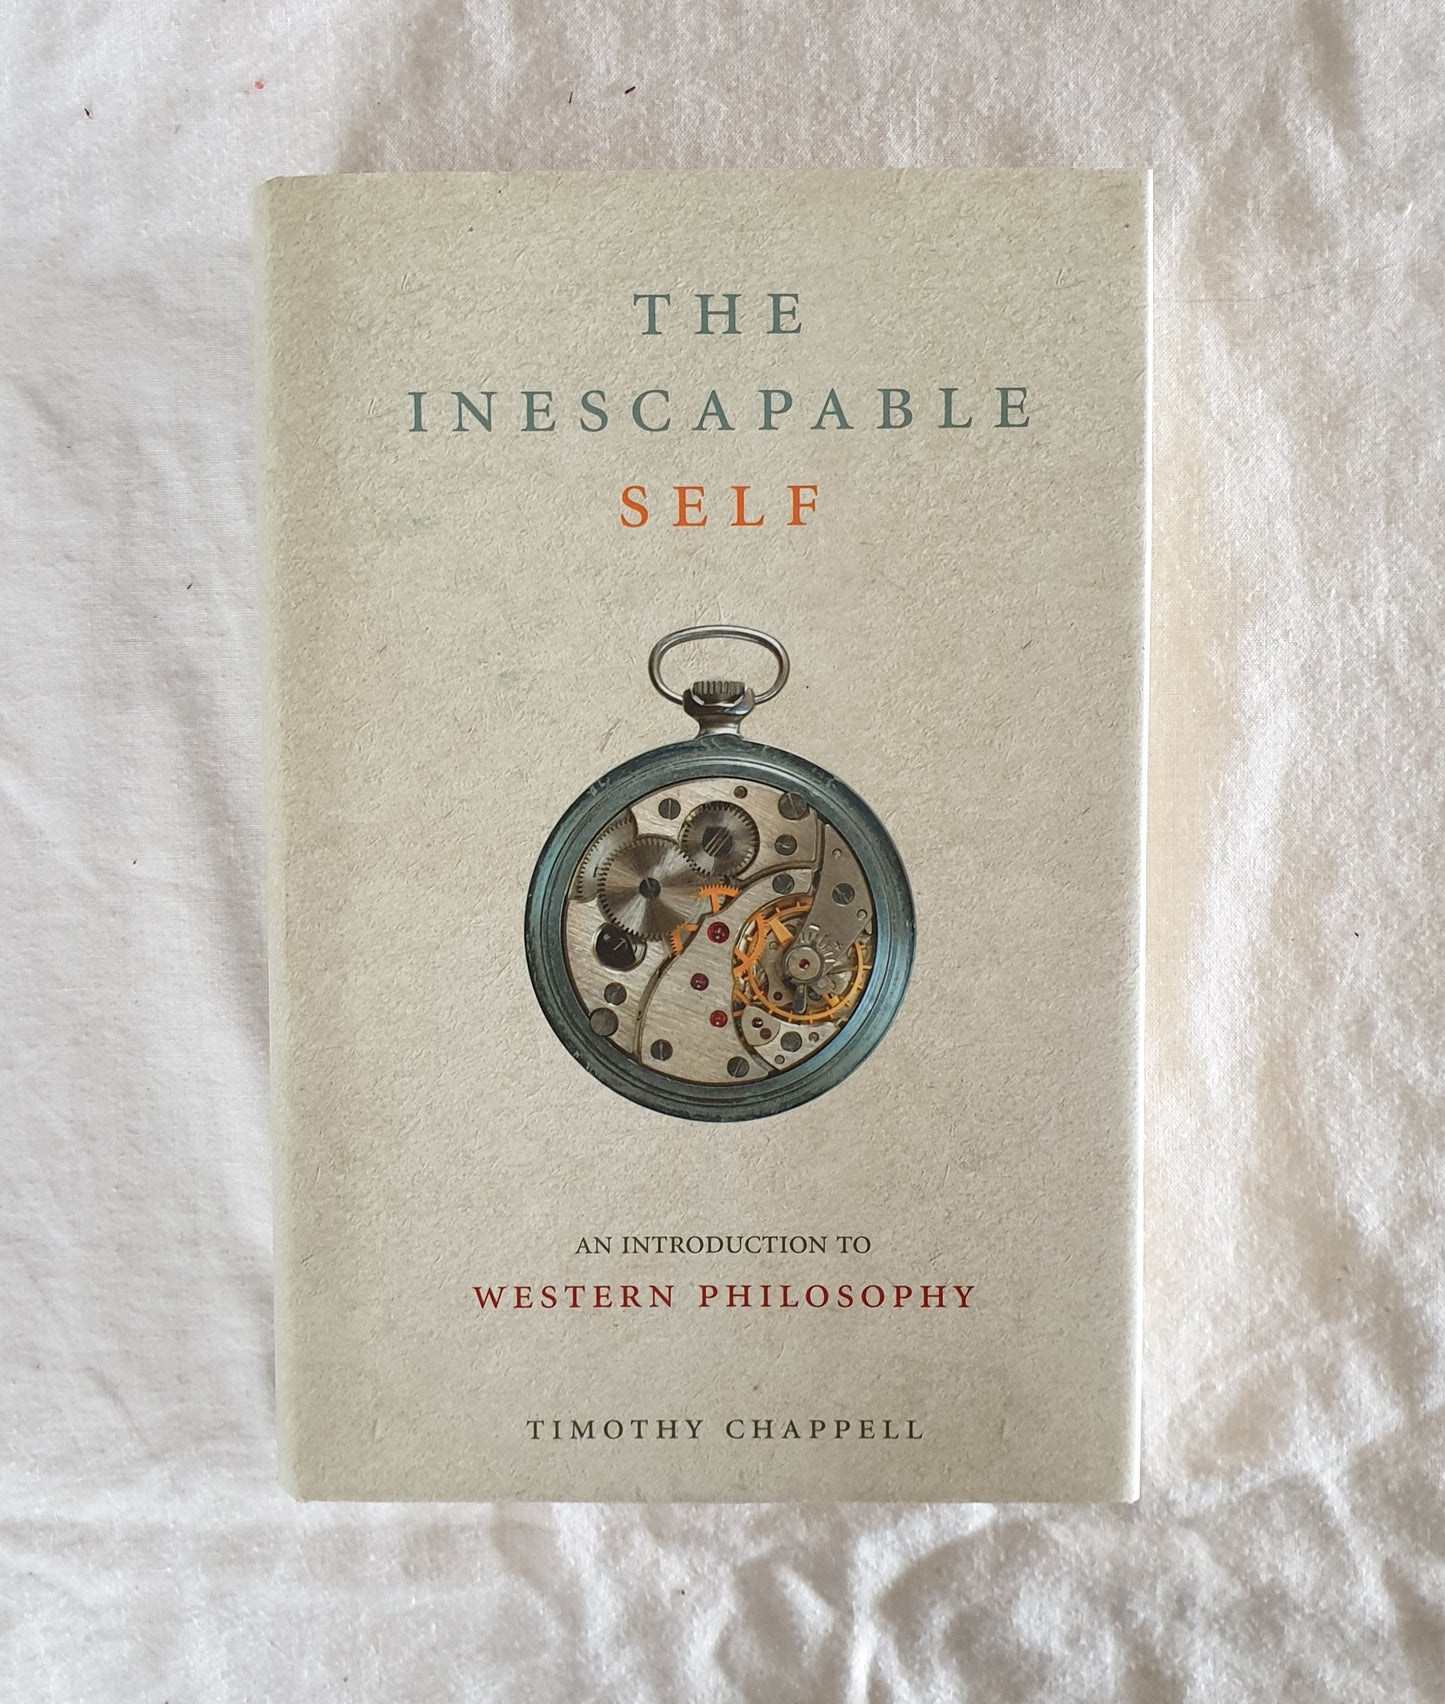 The Inescapable Self  An Introduction to Western Philosophy  by Timothy Chappell